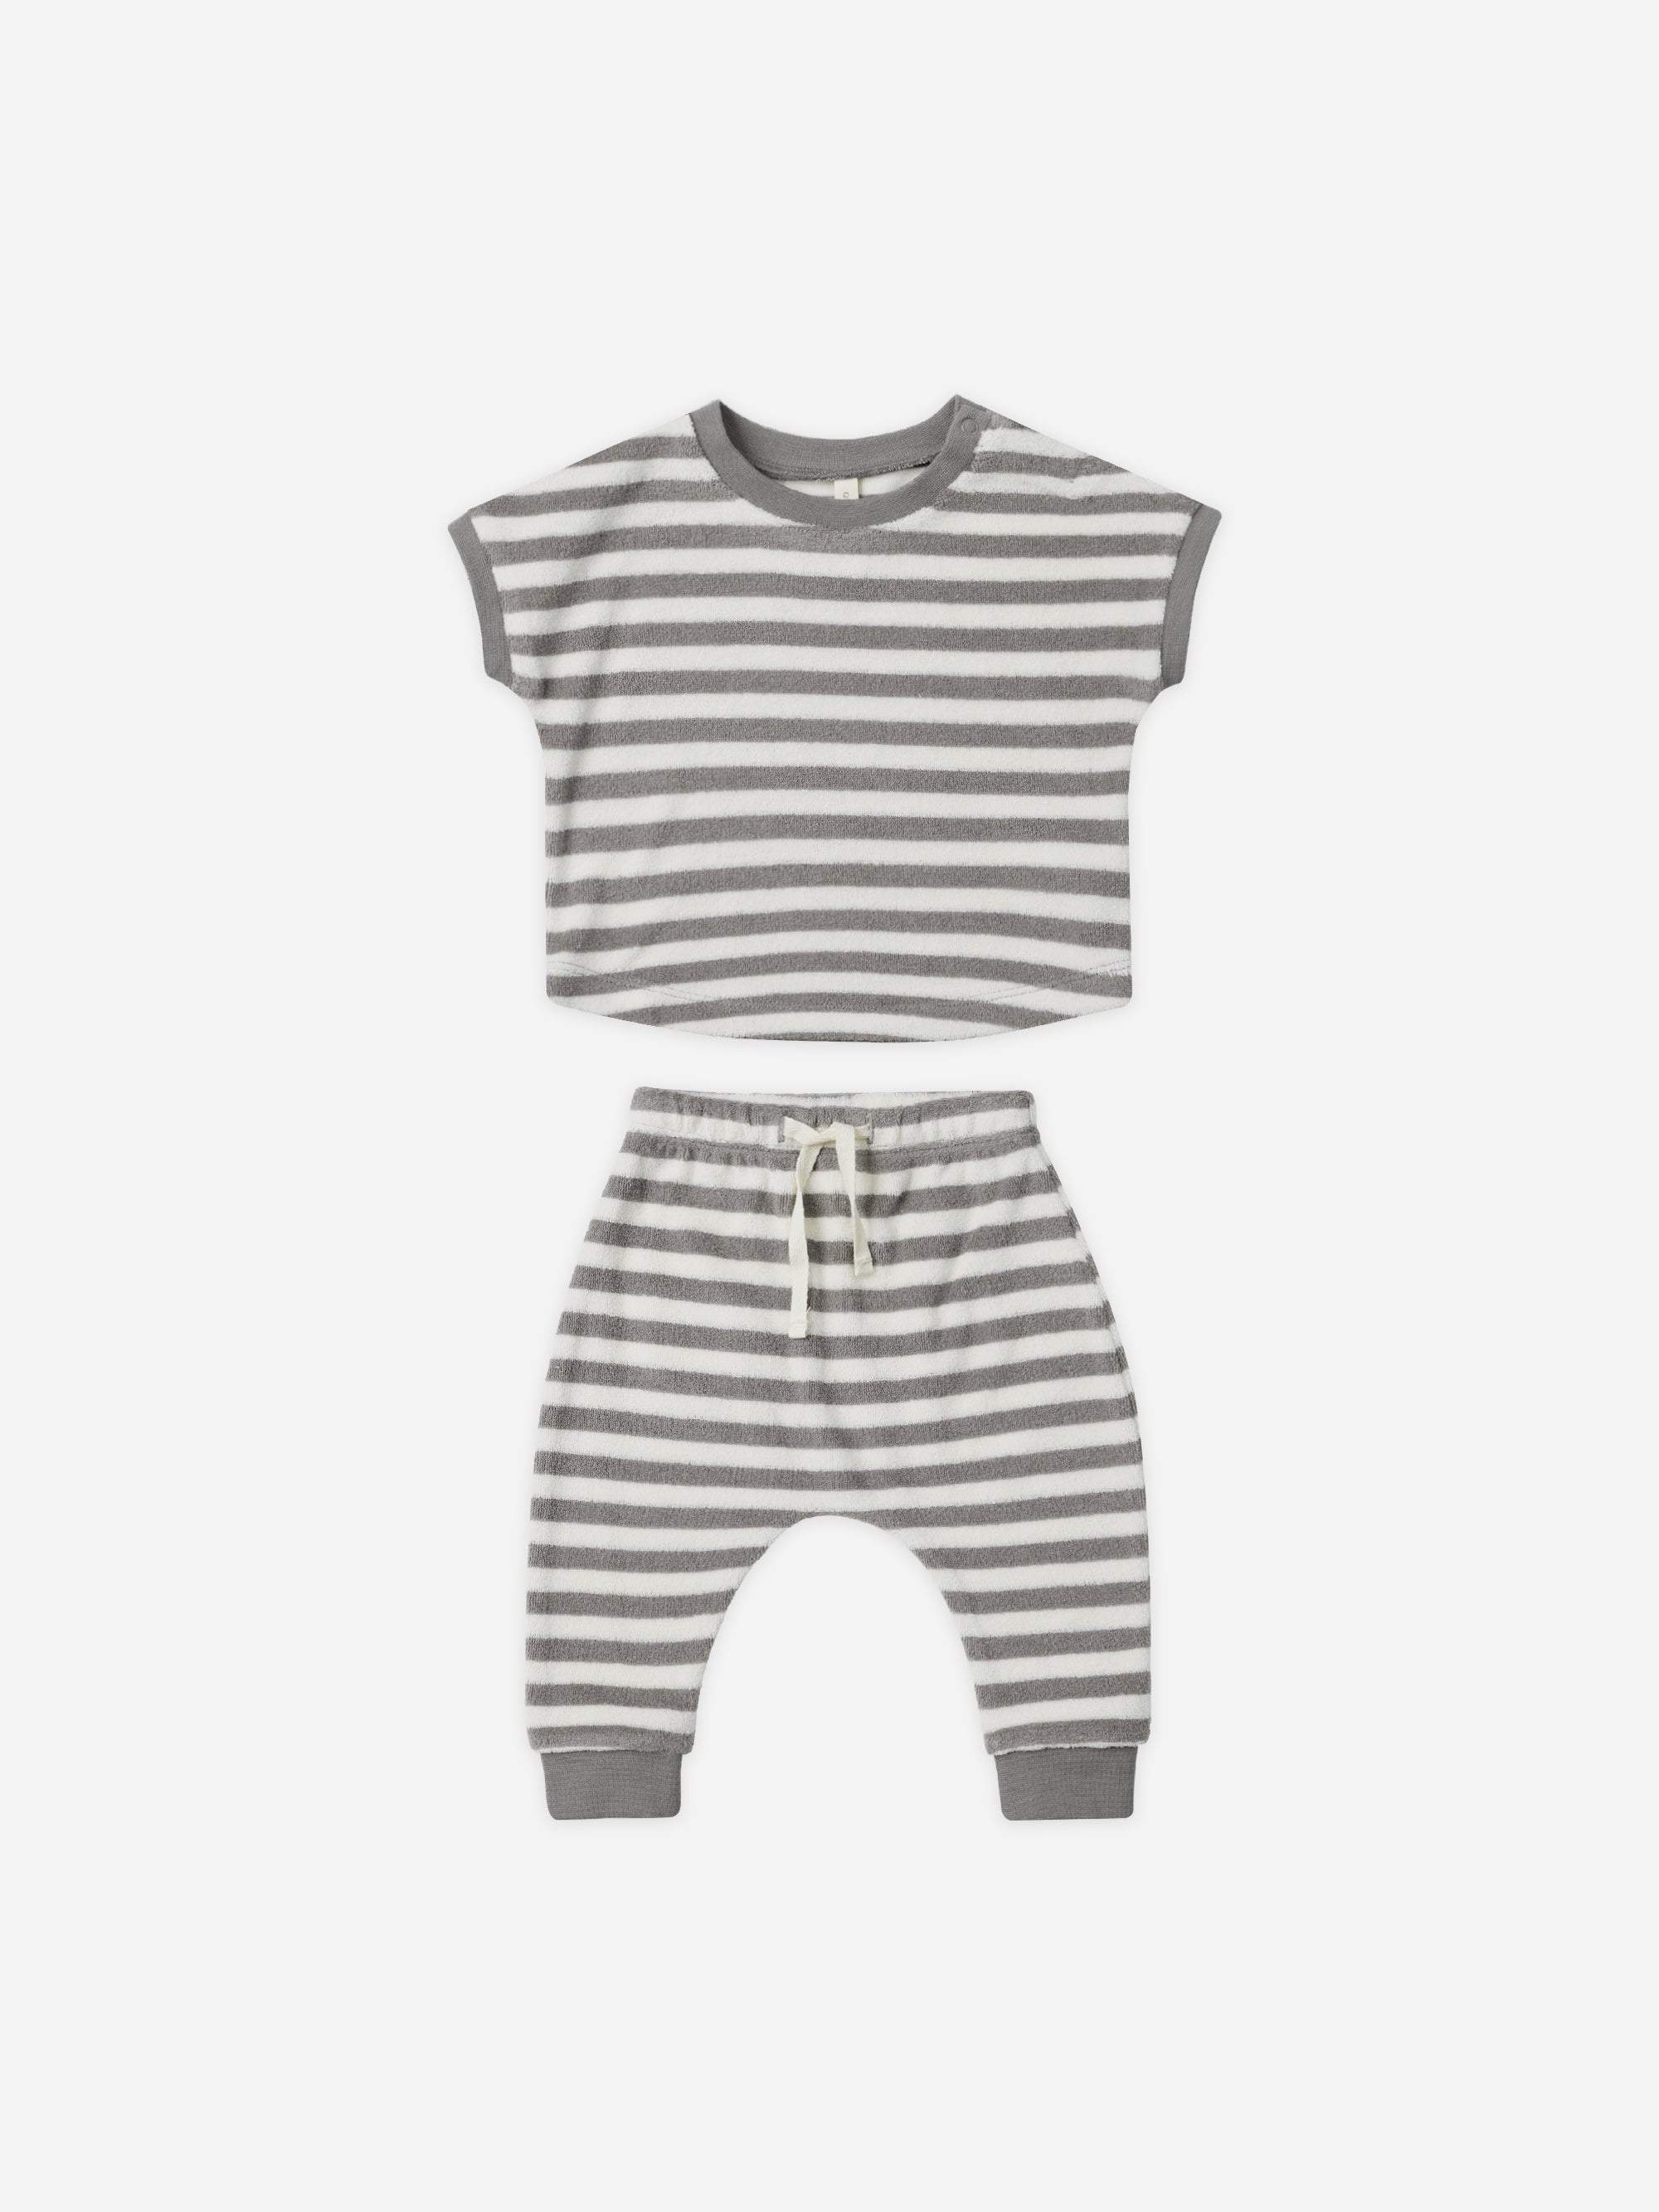 Terry Tee + Pant Set || Retro Stripe - Rylee + Cru | Kids Clothes | Trendy Baby Clothes | Modern Infant Outfits |